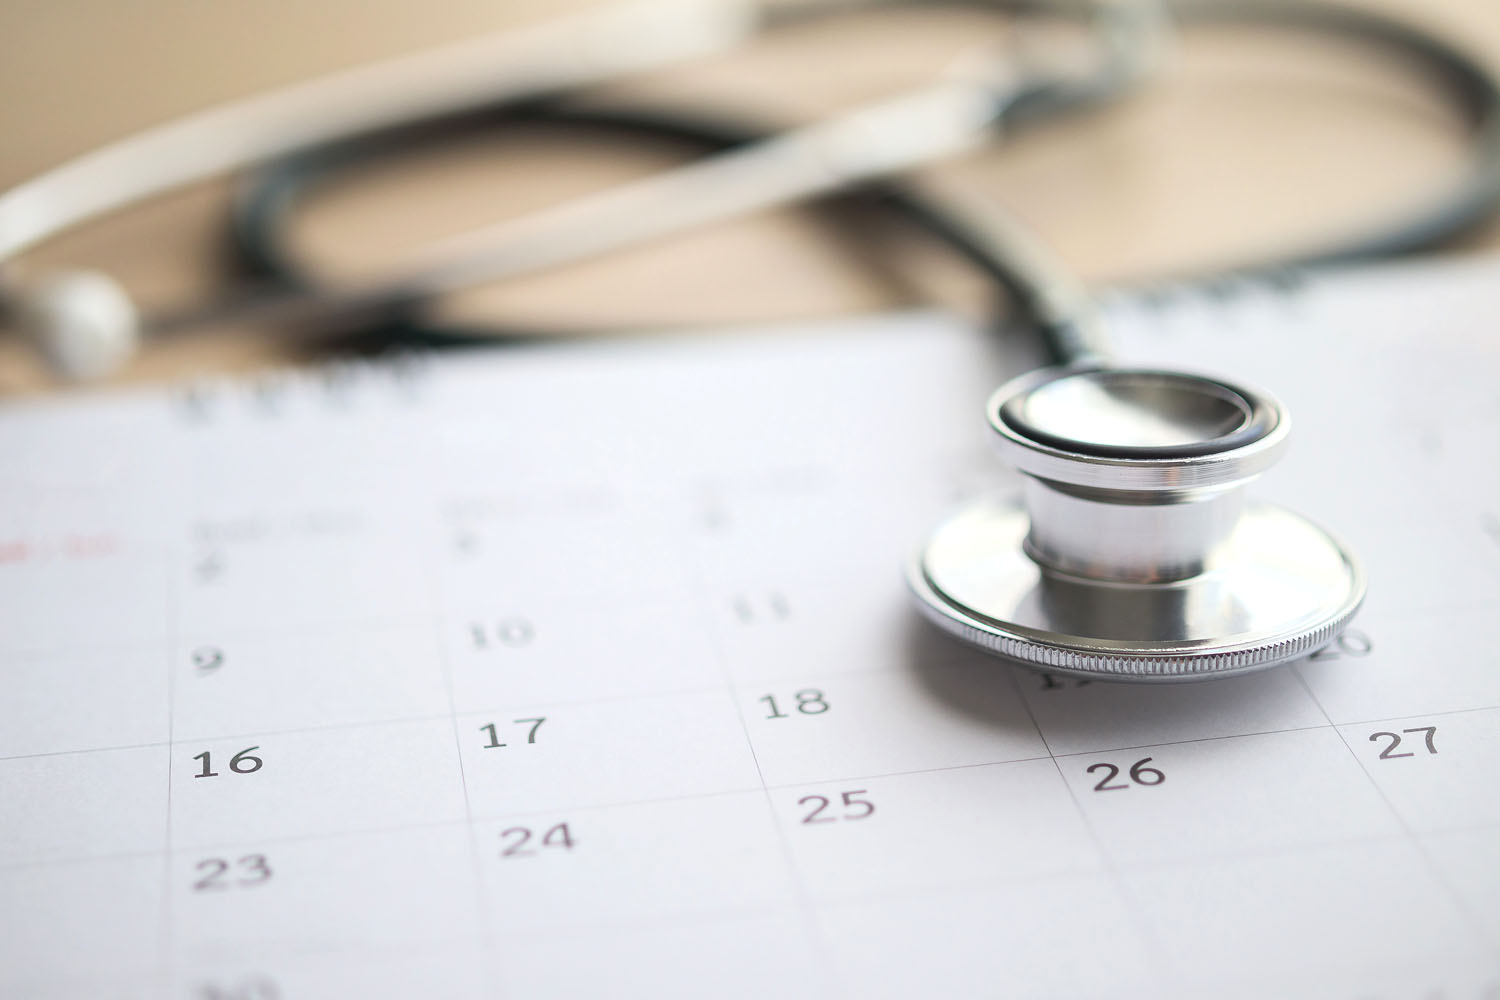 Request an Appointment with calendar and stethoscope